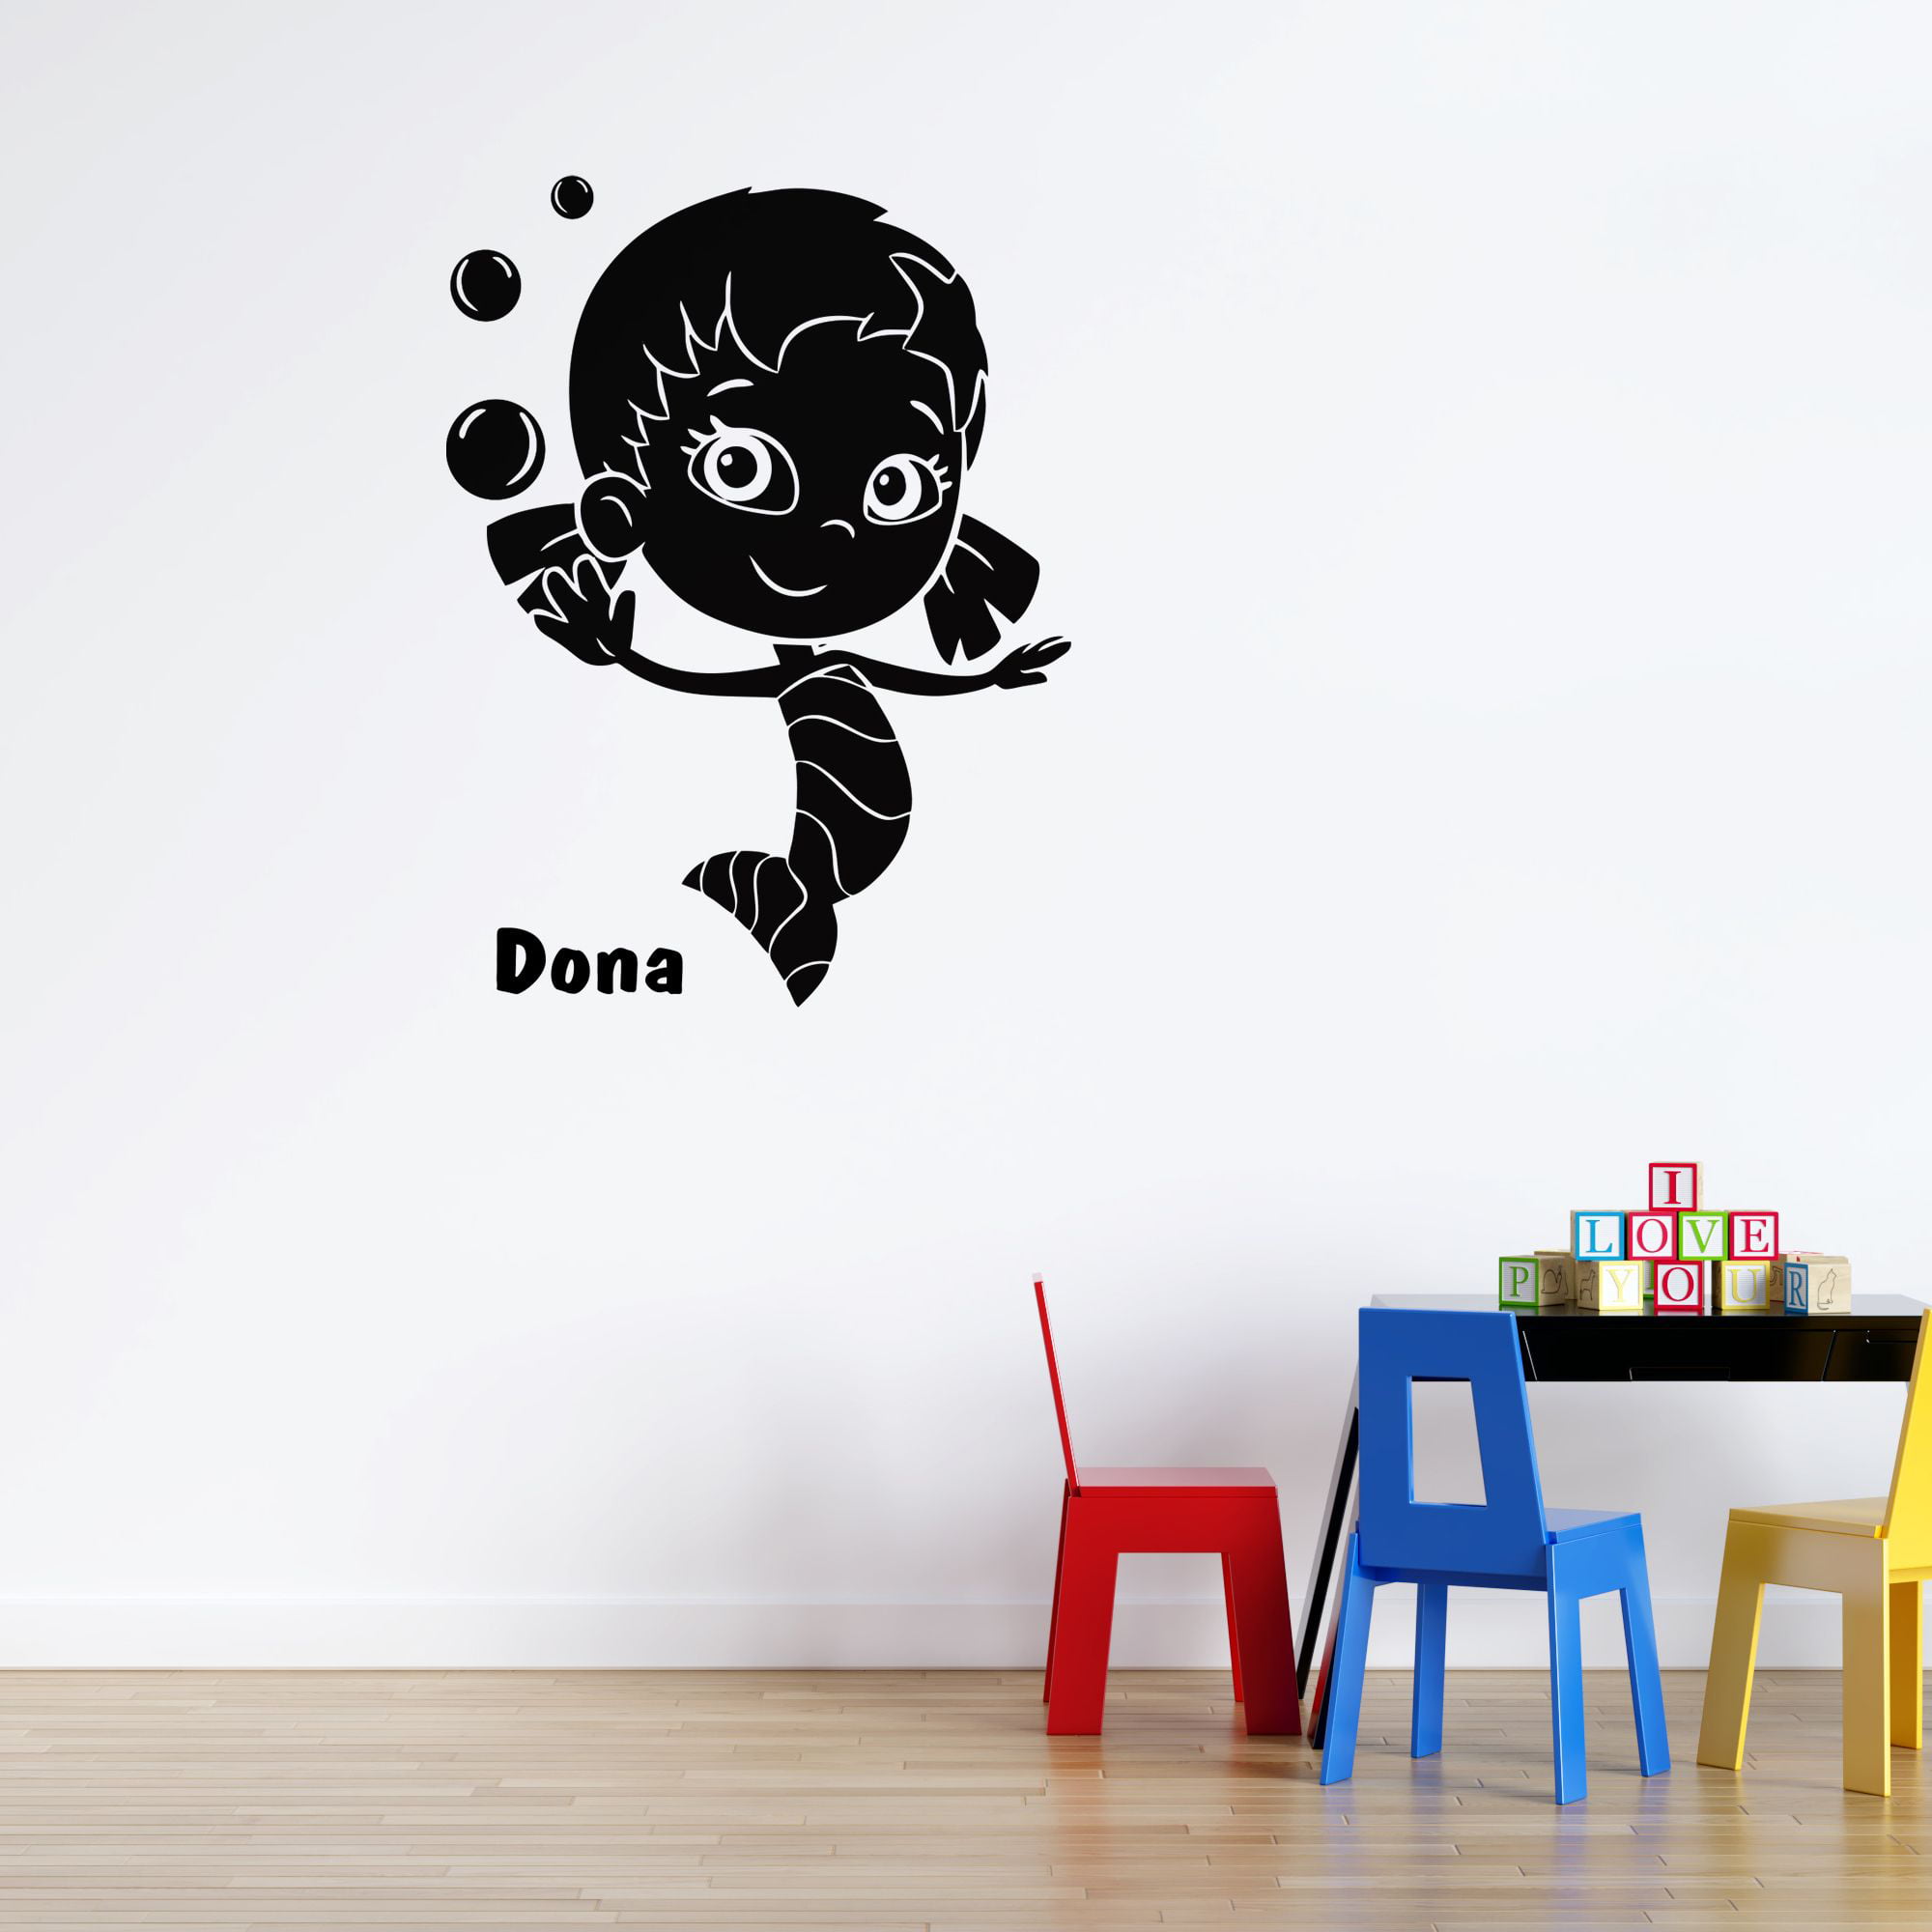 Oona from Bubble Guppies Comedy Cartoon Series Wall Decal | 20